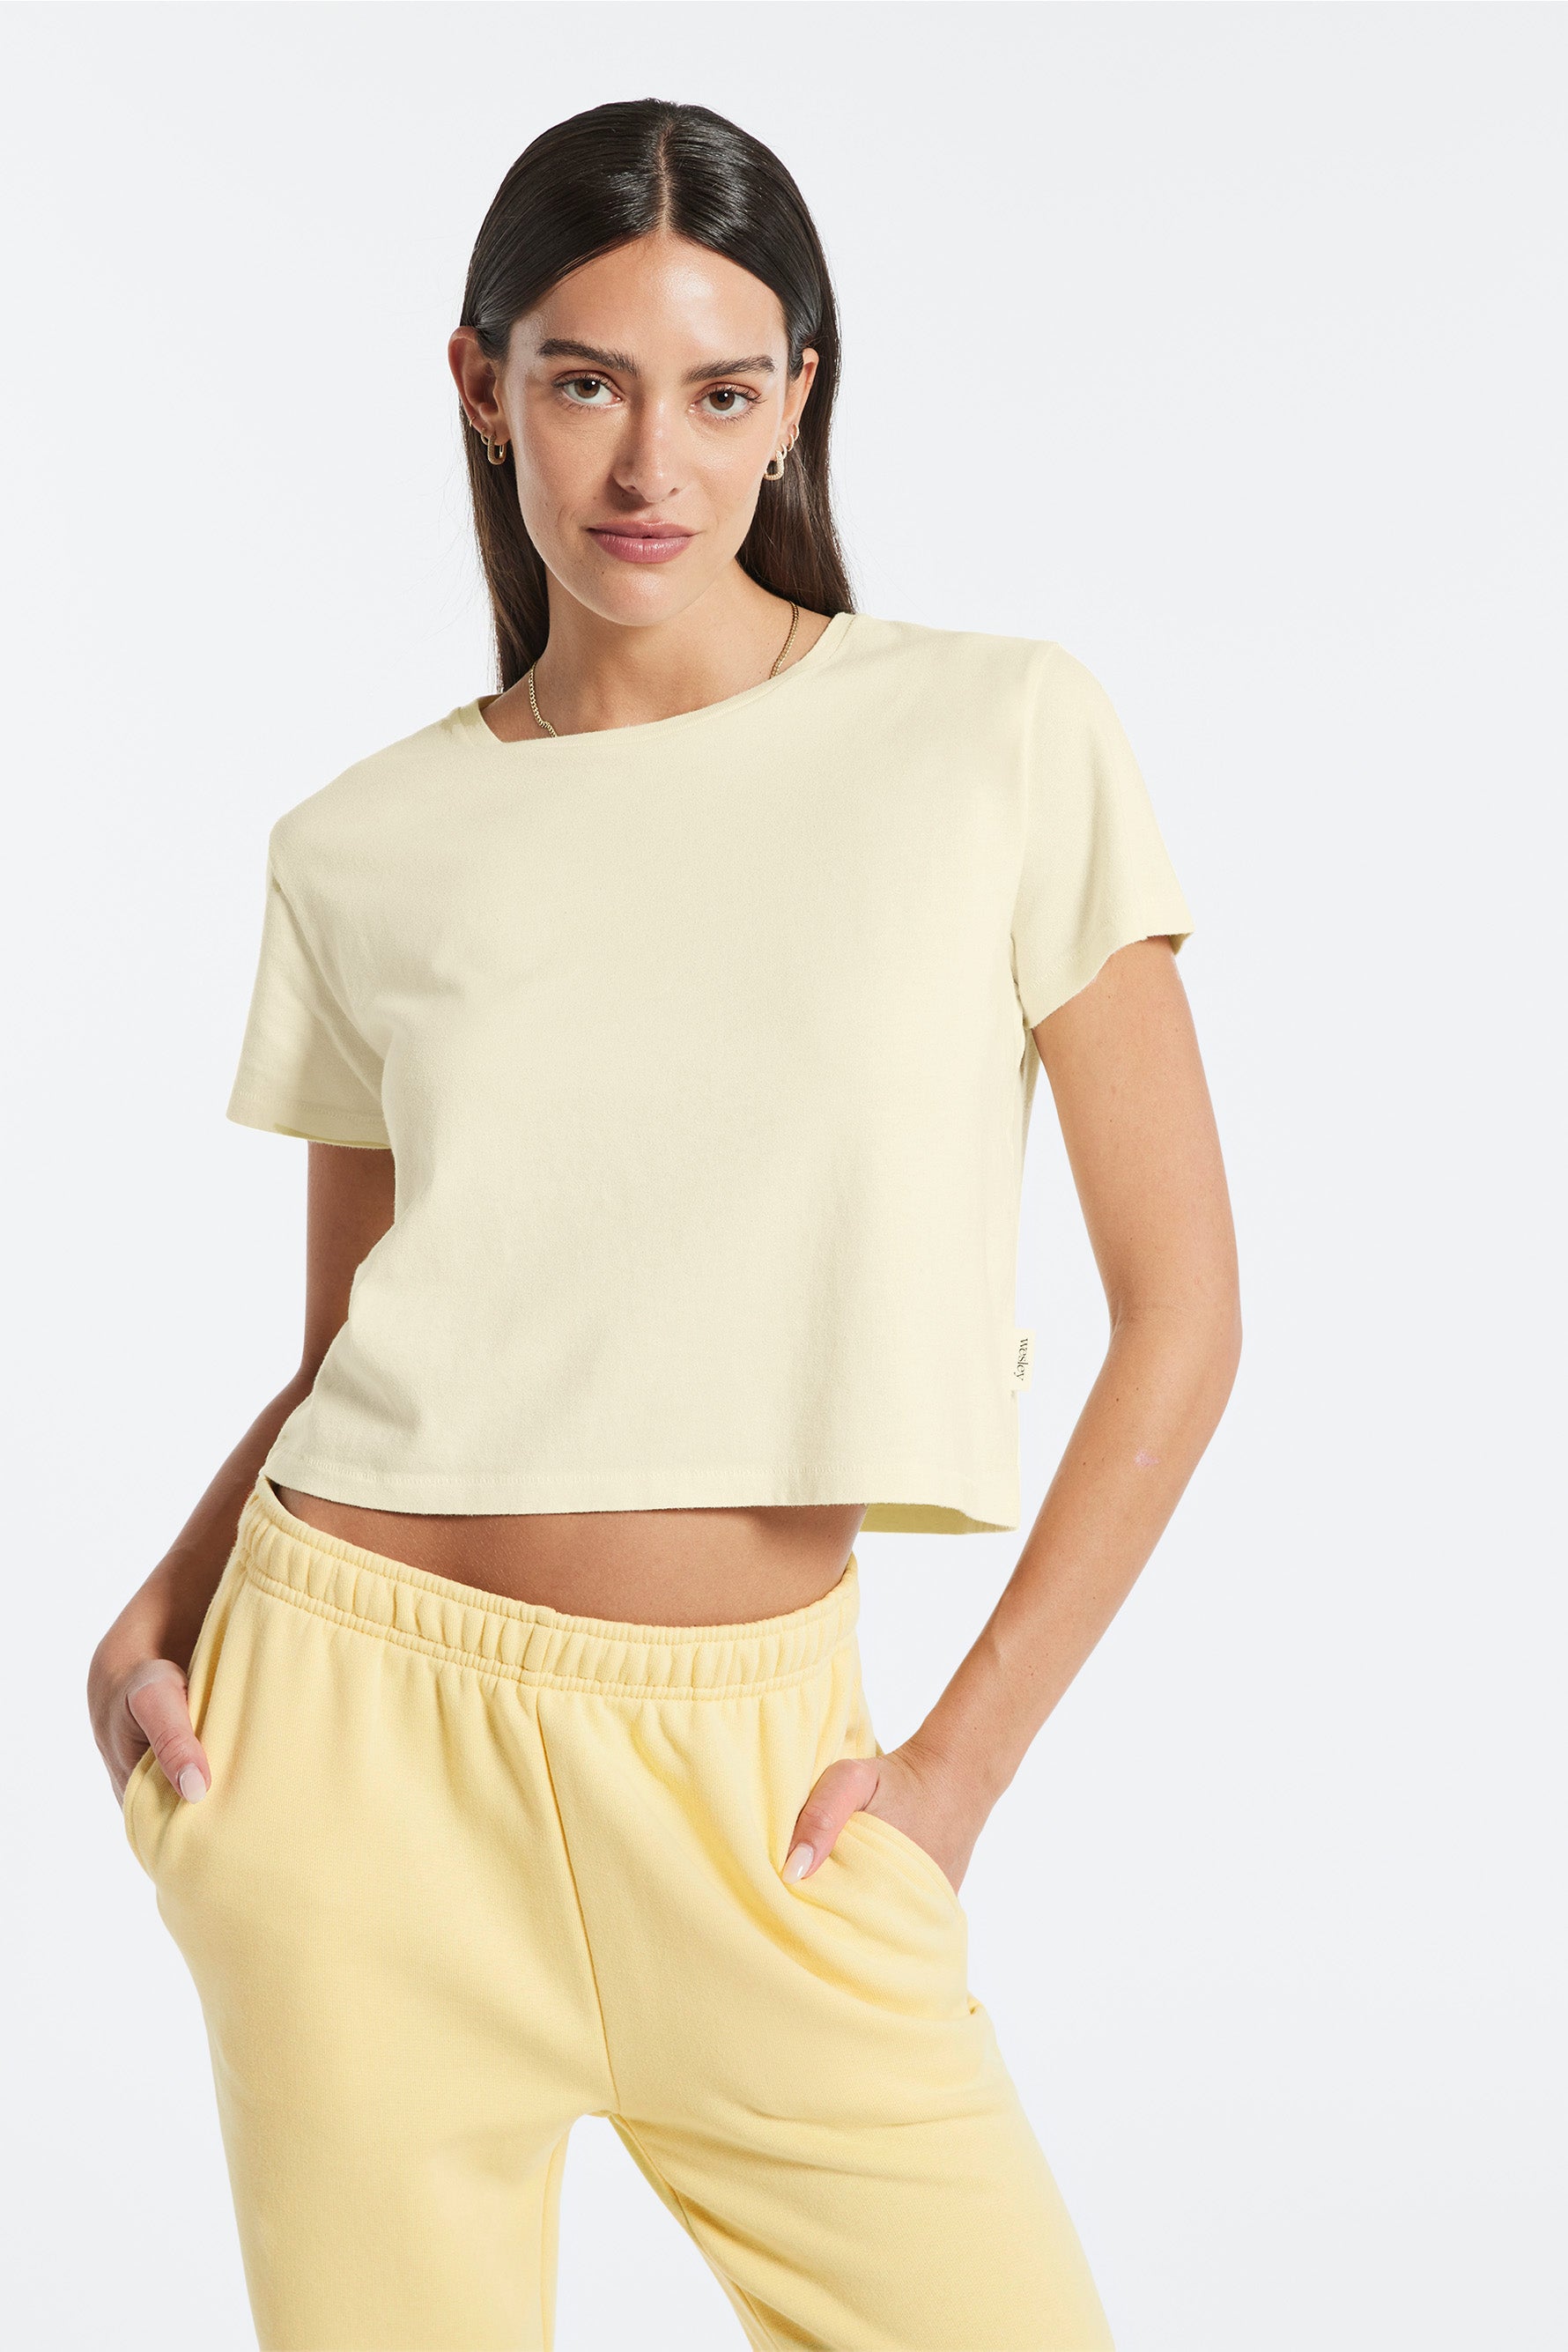 Buy Bandier Lightweight T-shirt - White At 30% Off